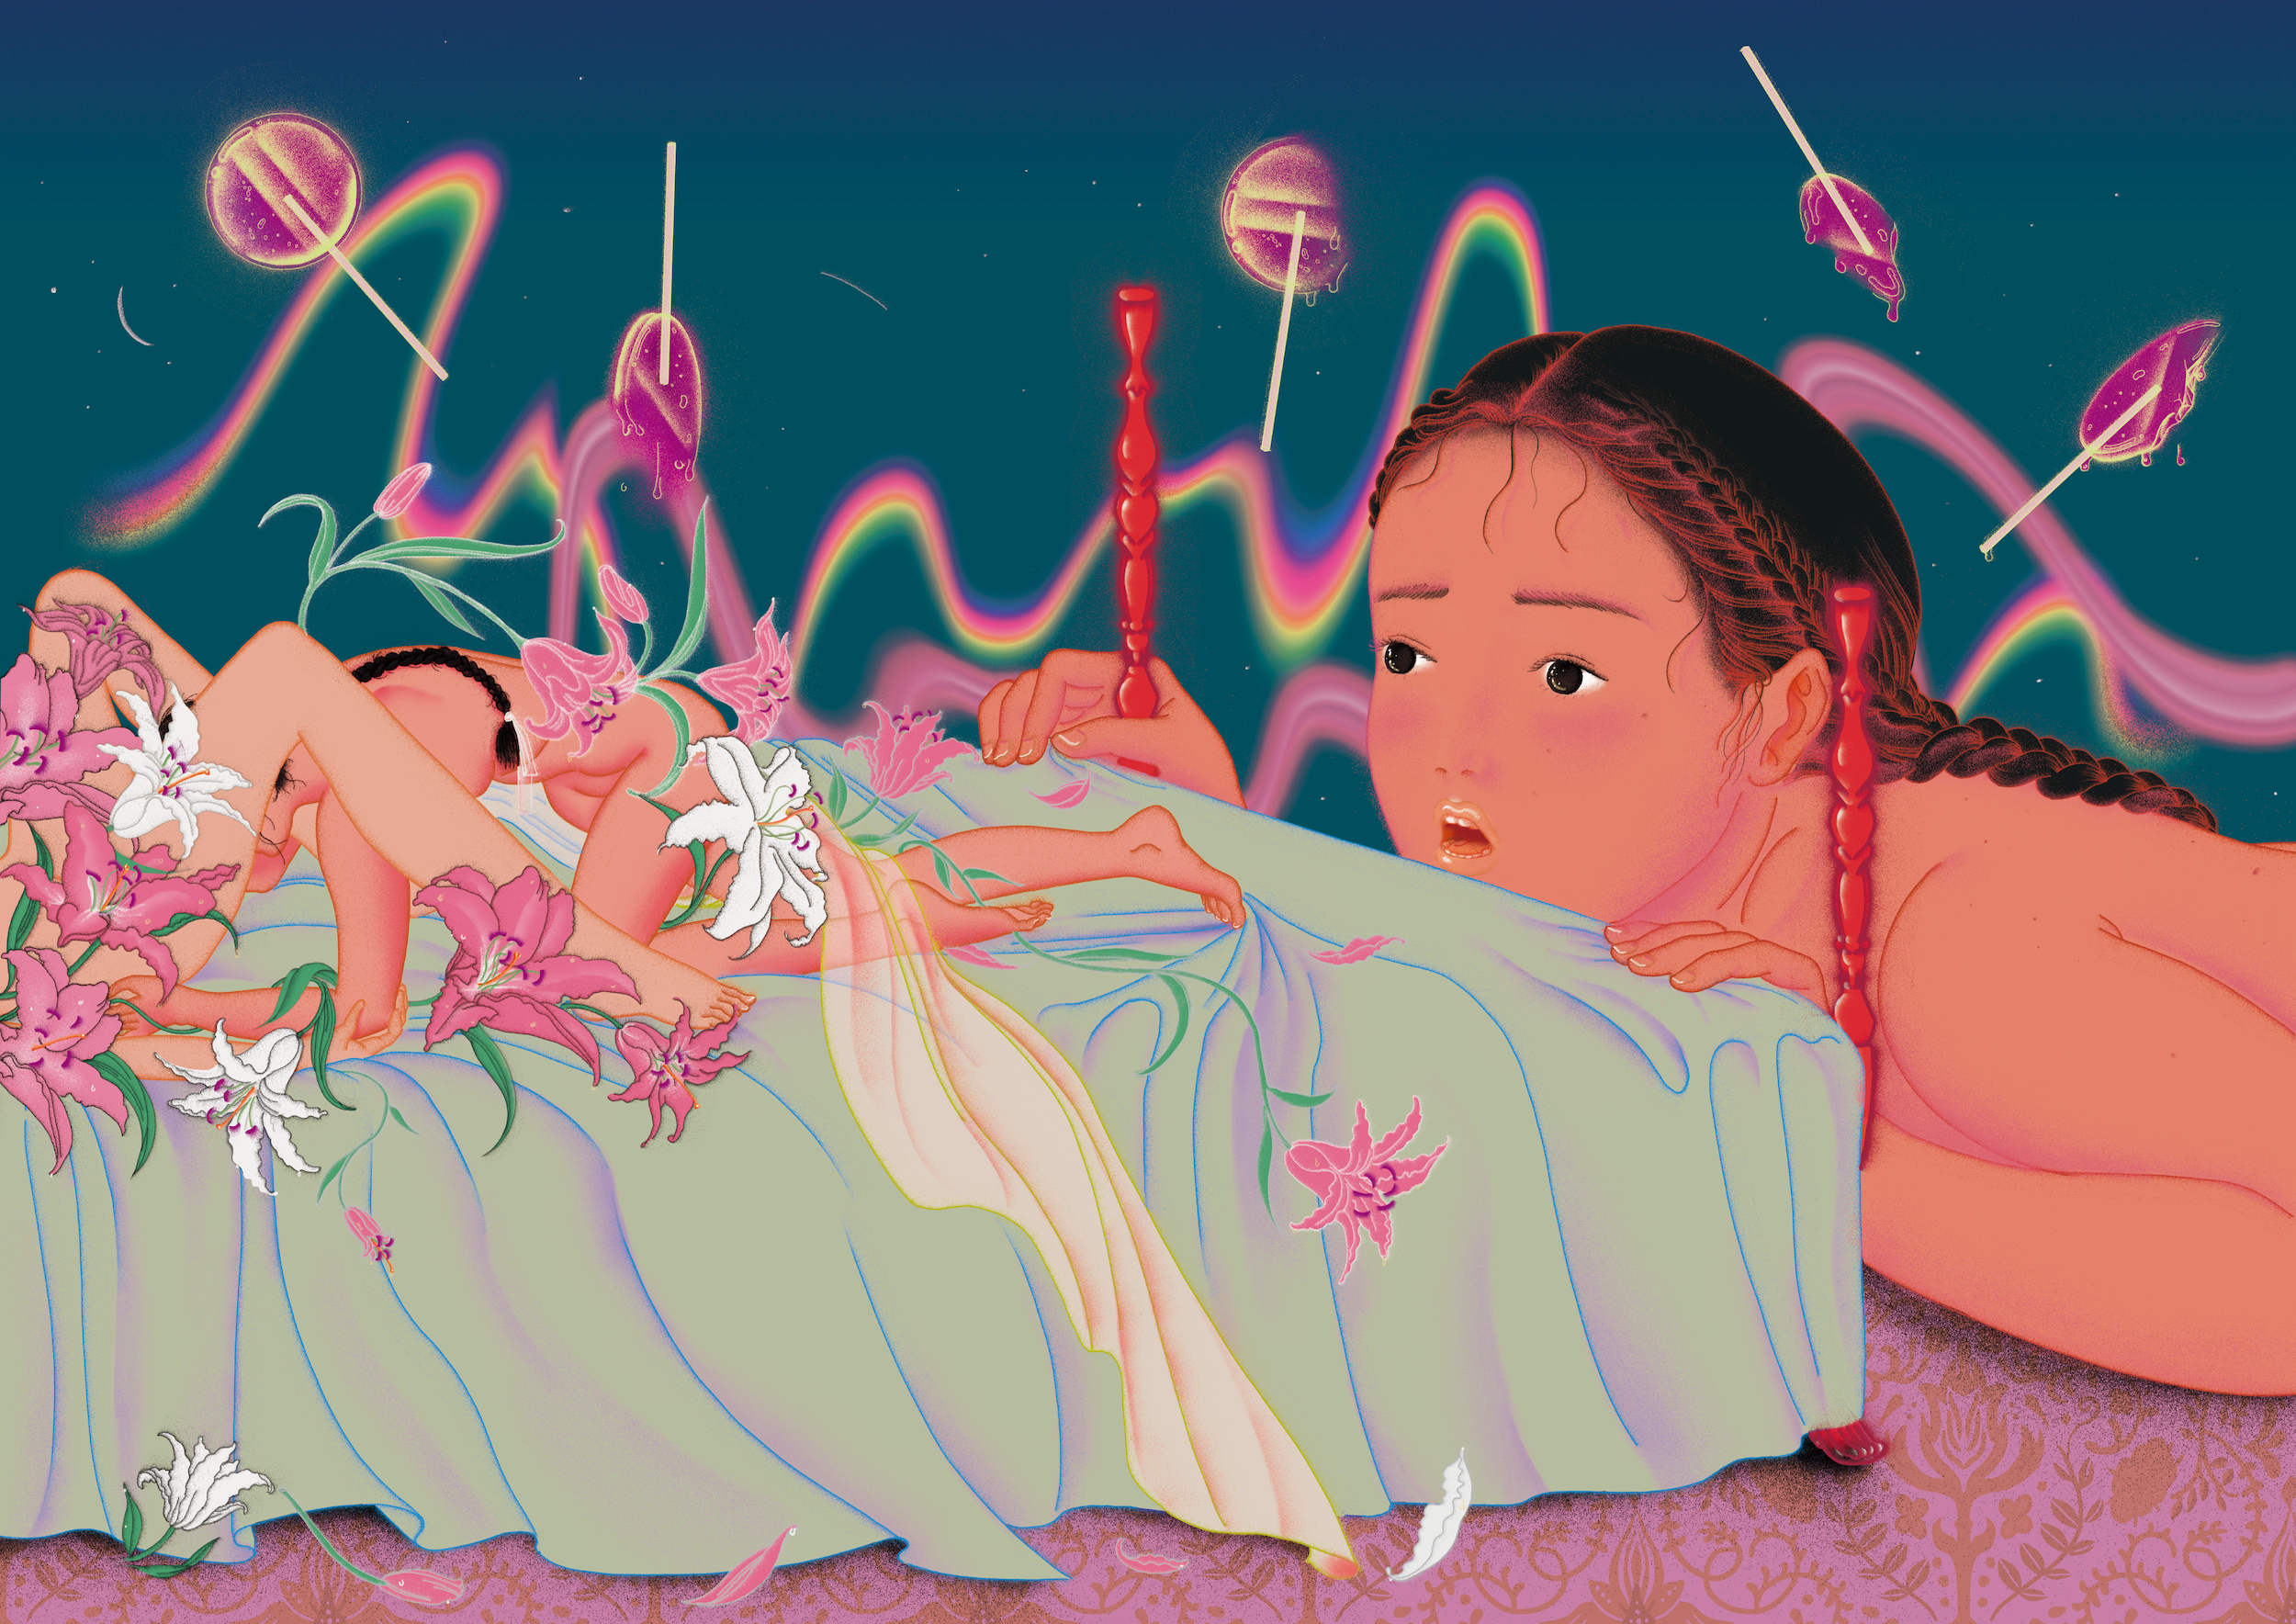 arch myself stitch this artist is using her dreamlike digital art to subvert the male gaze - Ram  Han talks about sexual fantasies and feminism in South Korea.